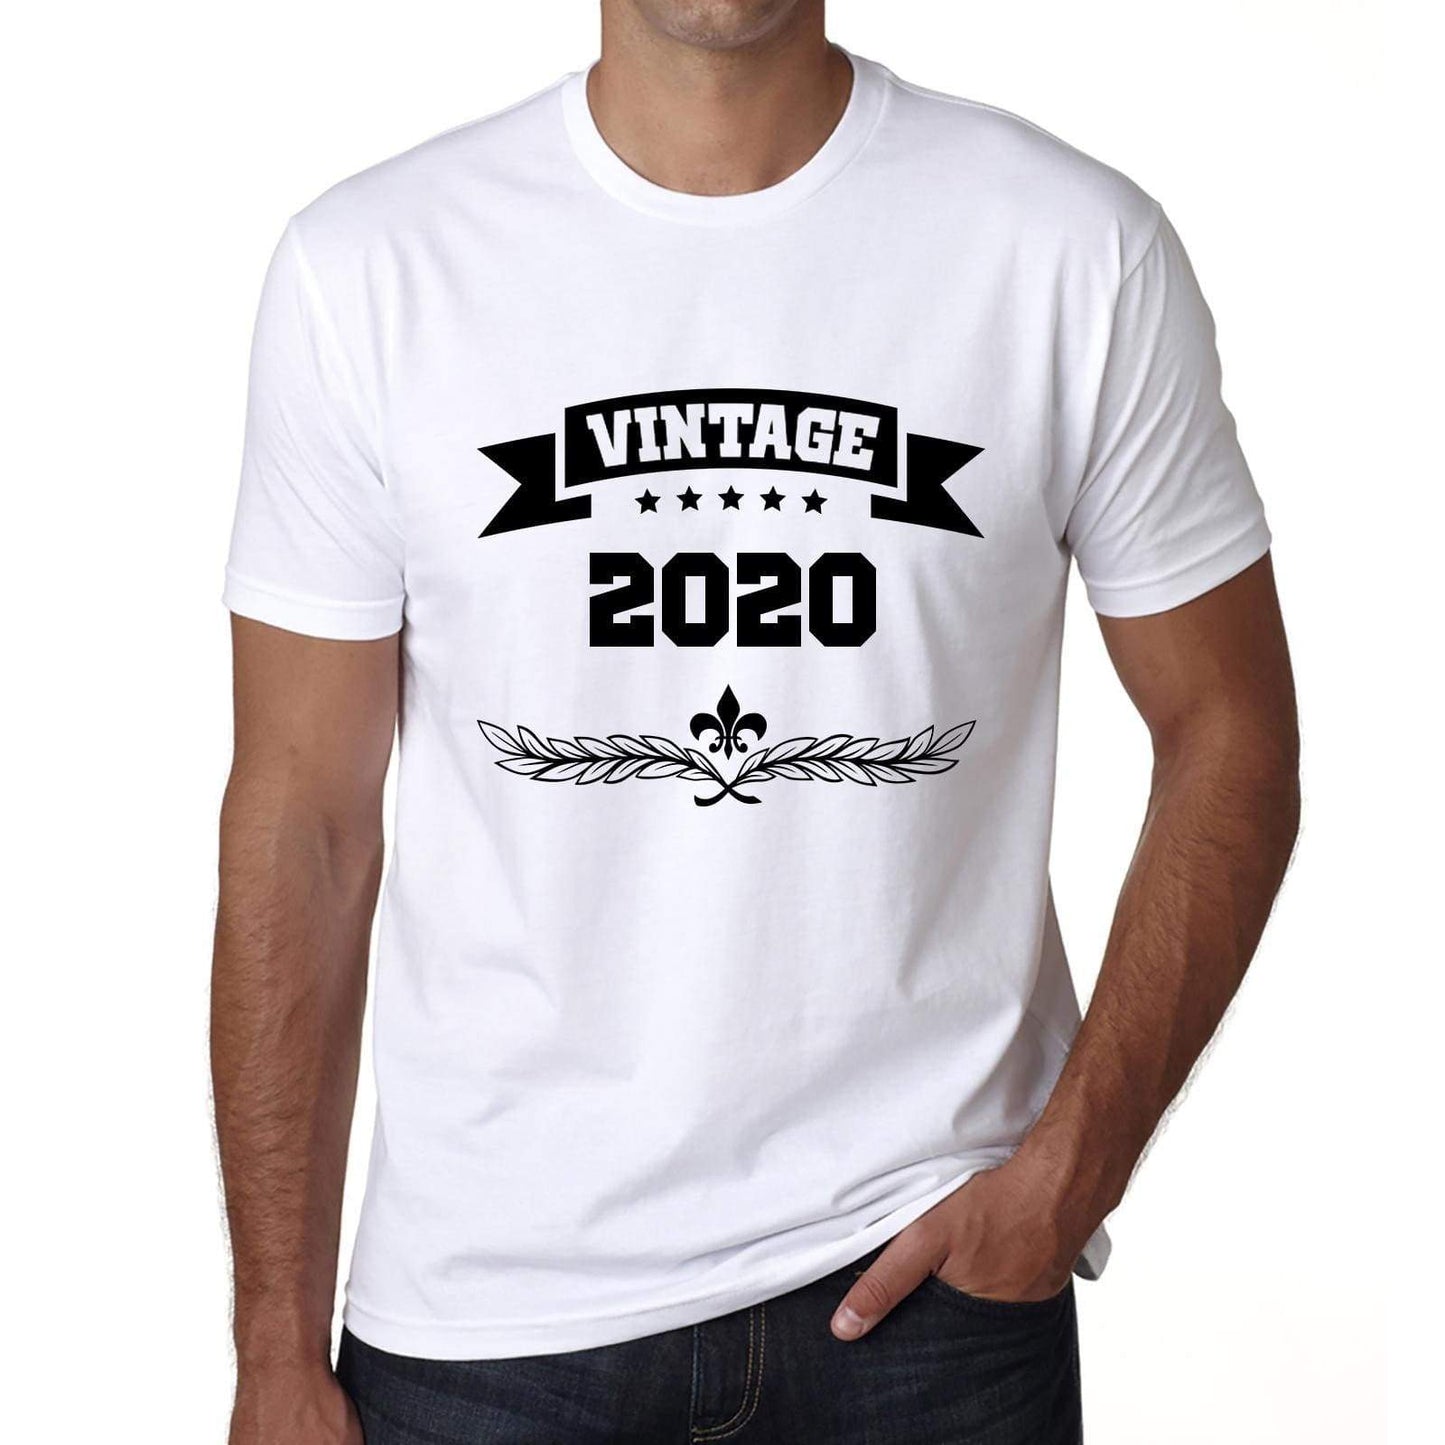 2020 Vintage Year White Mens Short Sleeve Round Neck T-Shirt 00096 - White / S - Casual